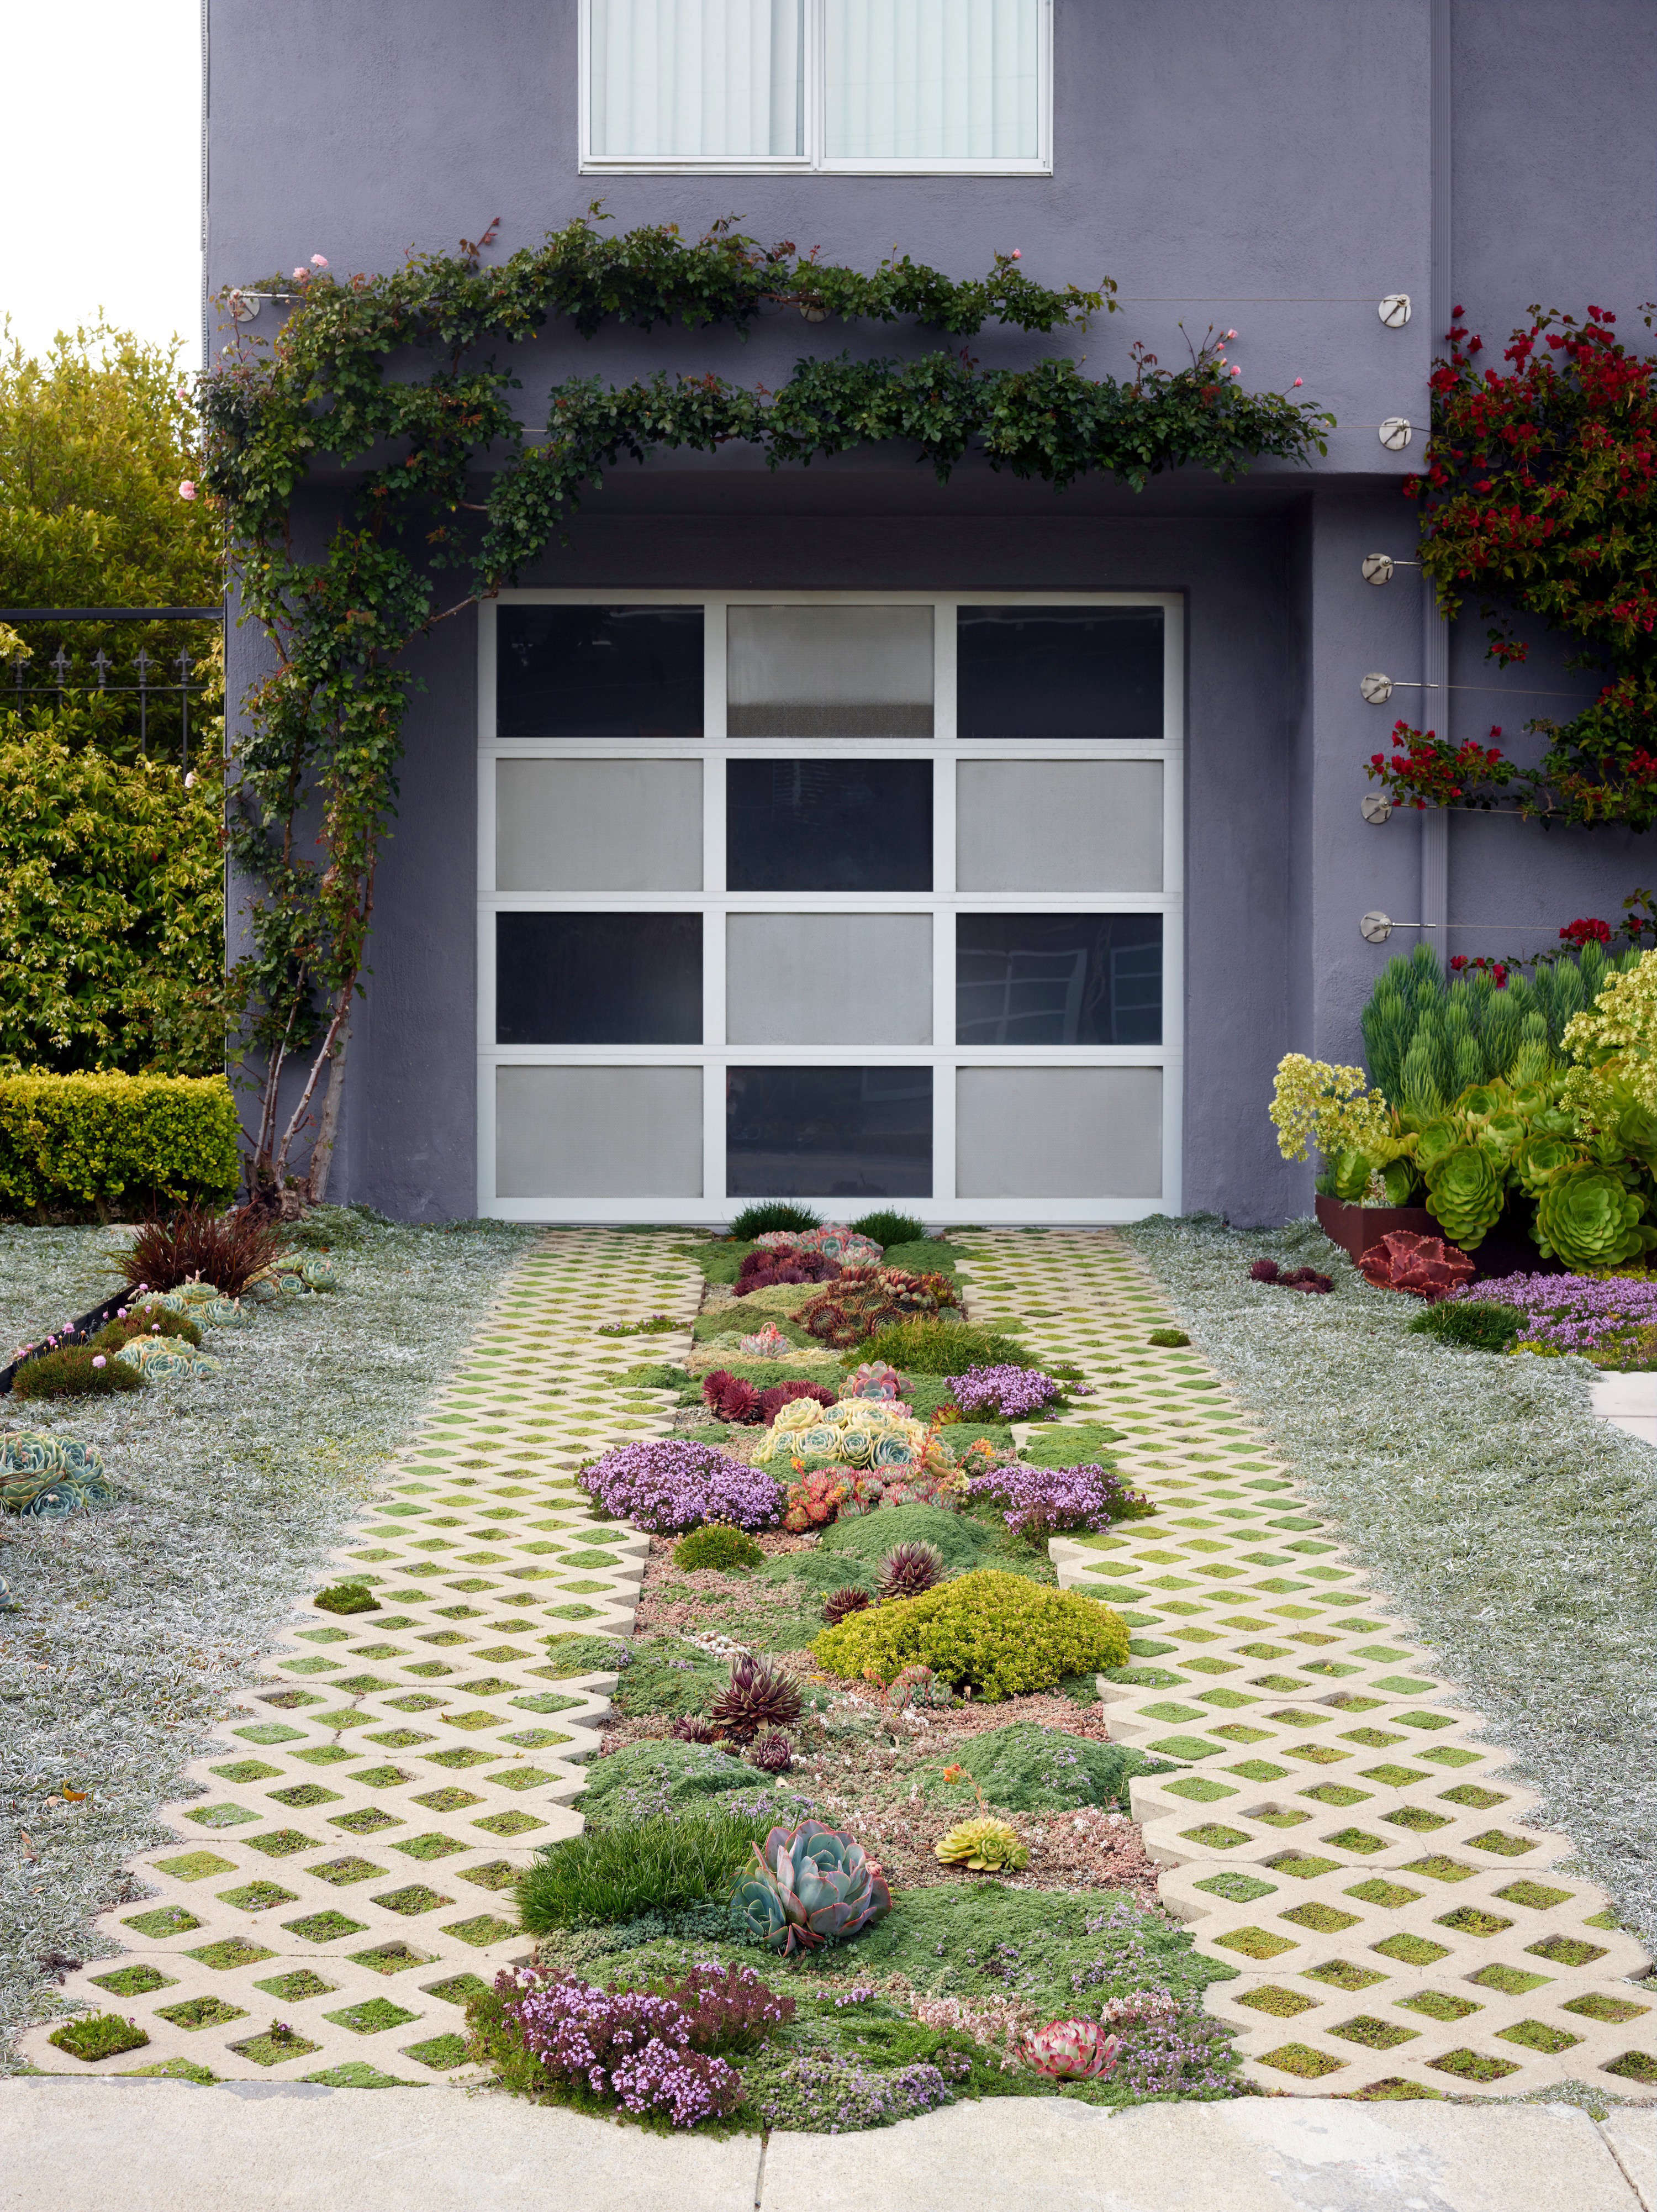 10 Things Nobody Tells You About Garage Design Gardenista